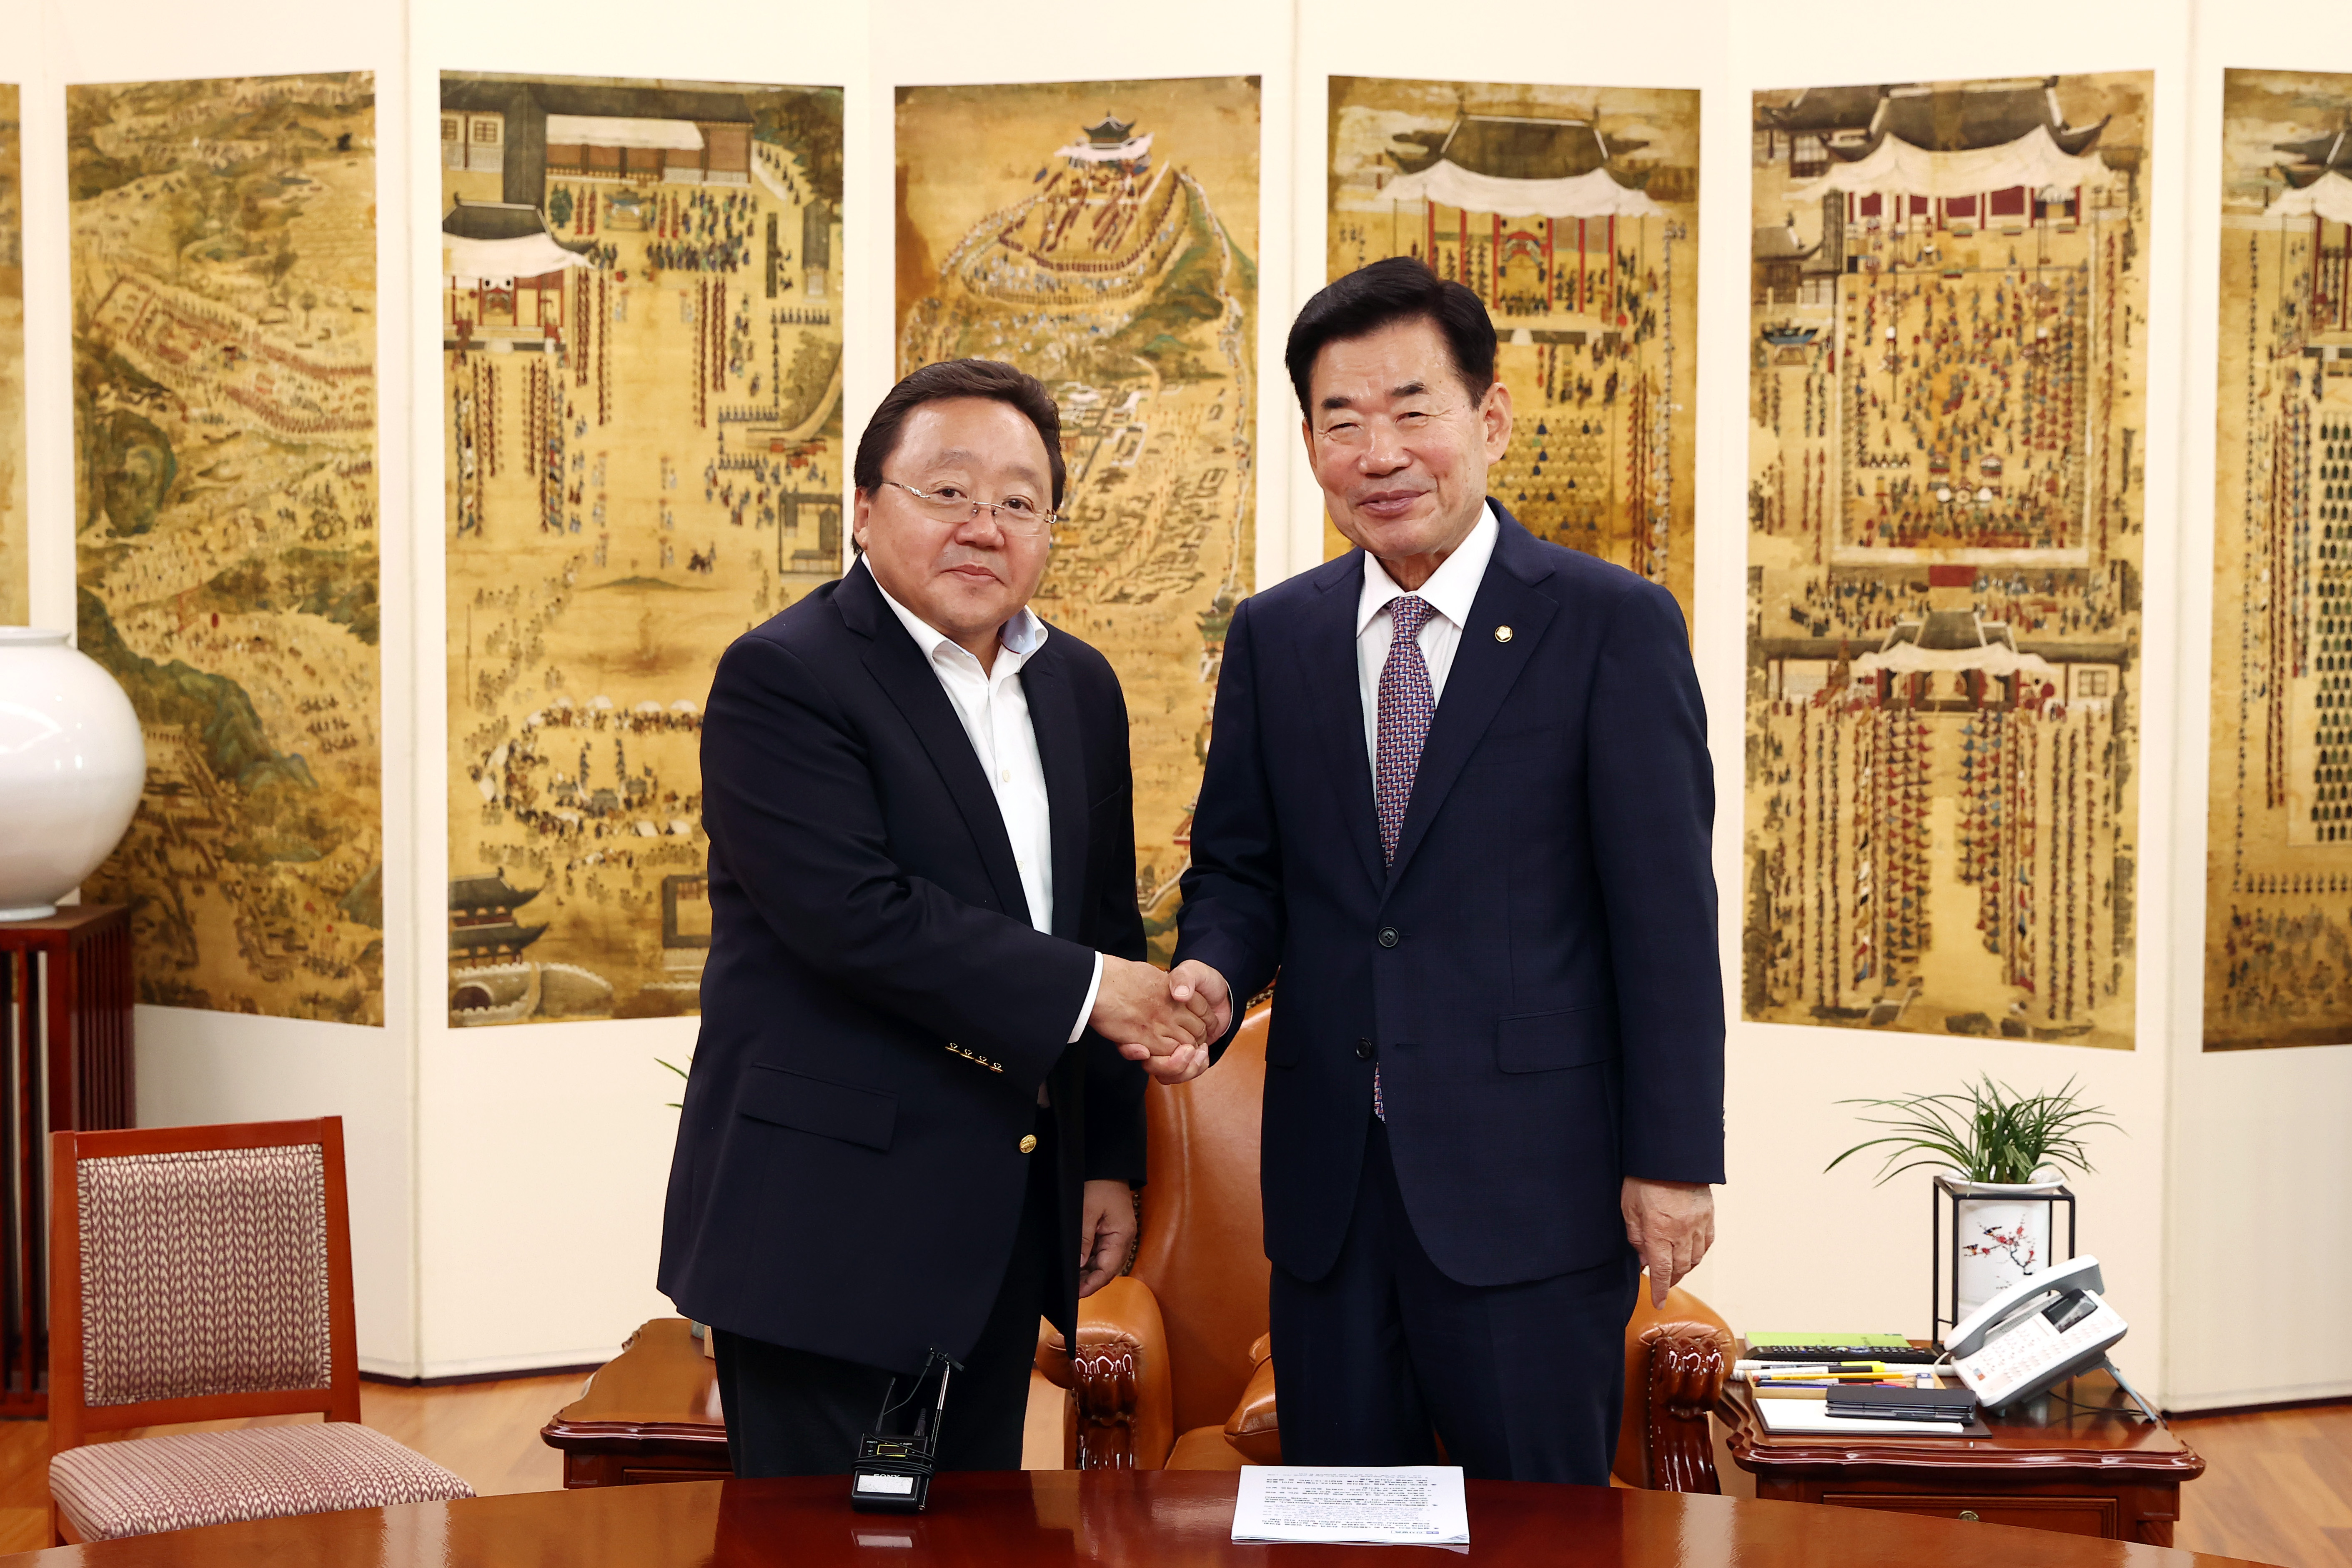 Speaker meets with former Mongolian President 관련사진 2 보기